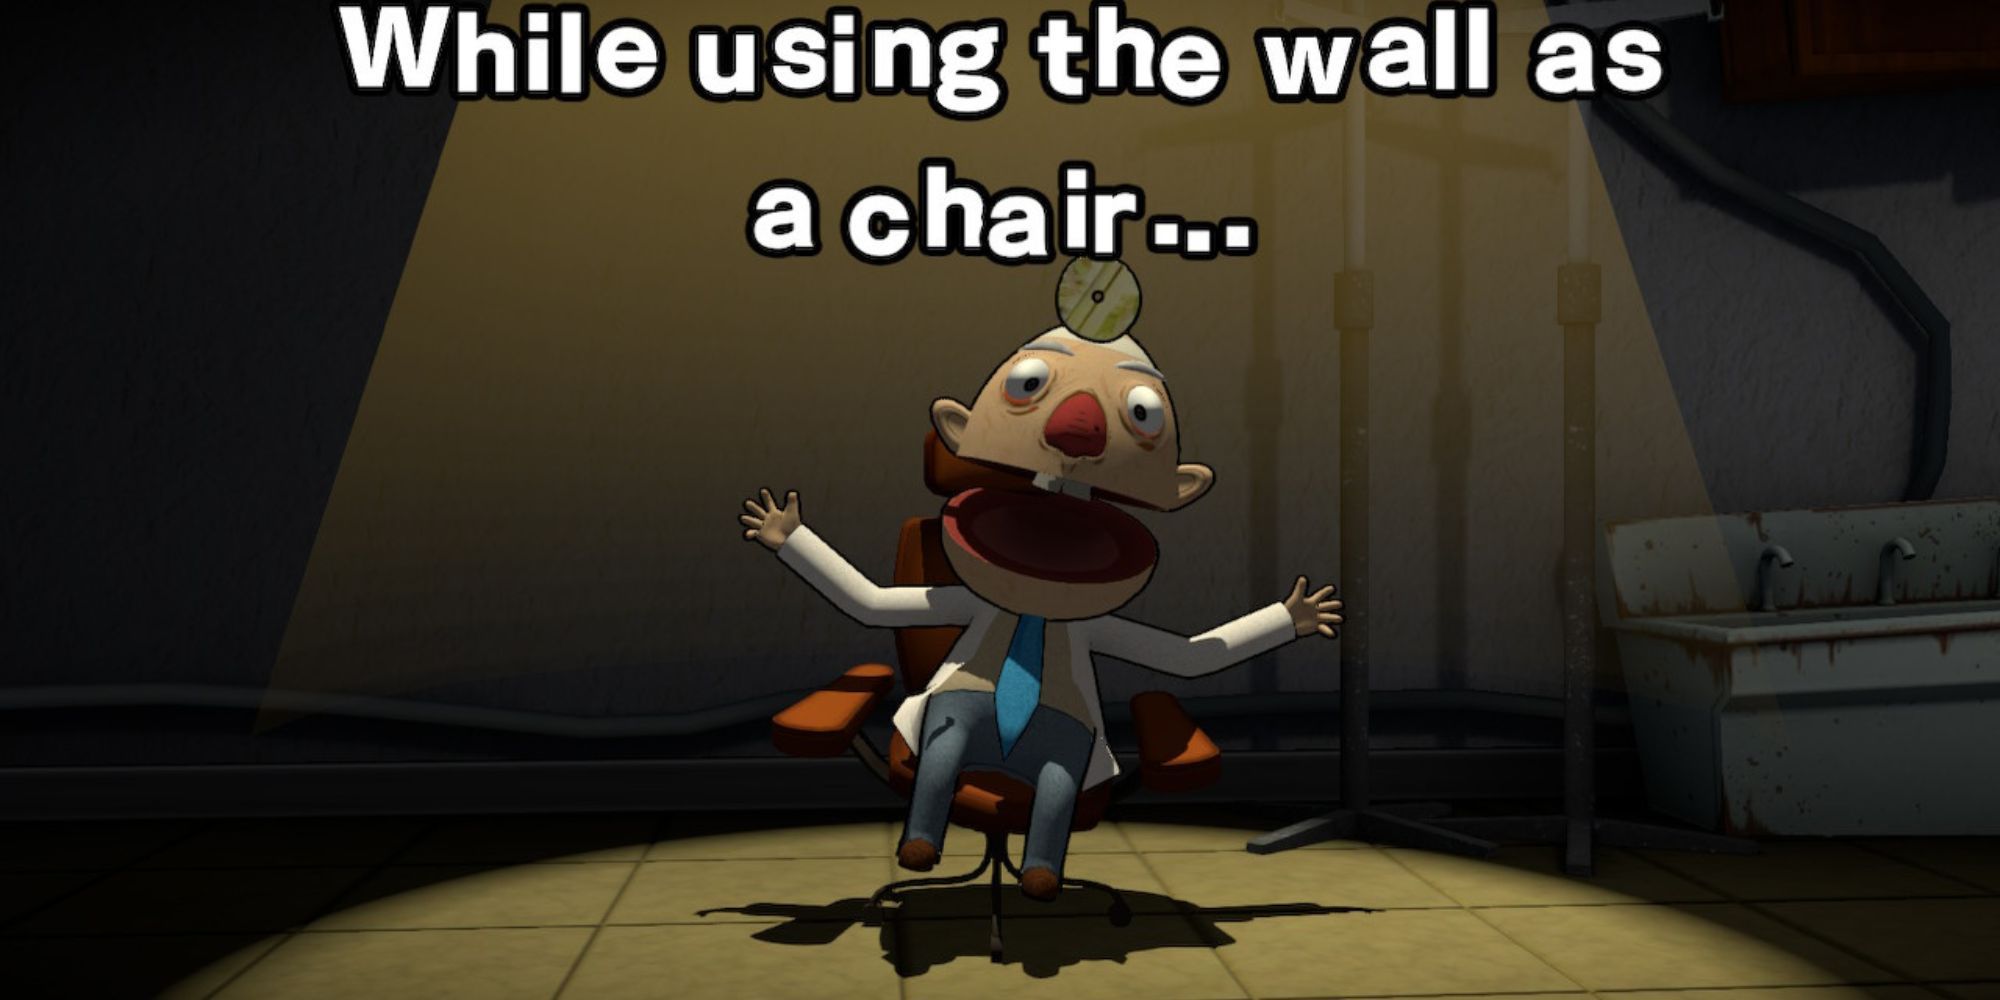 The doctor gives an order while sitting in a chair